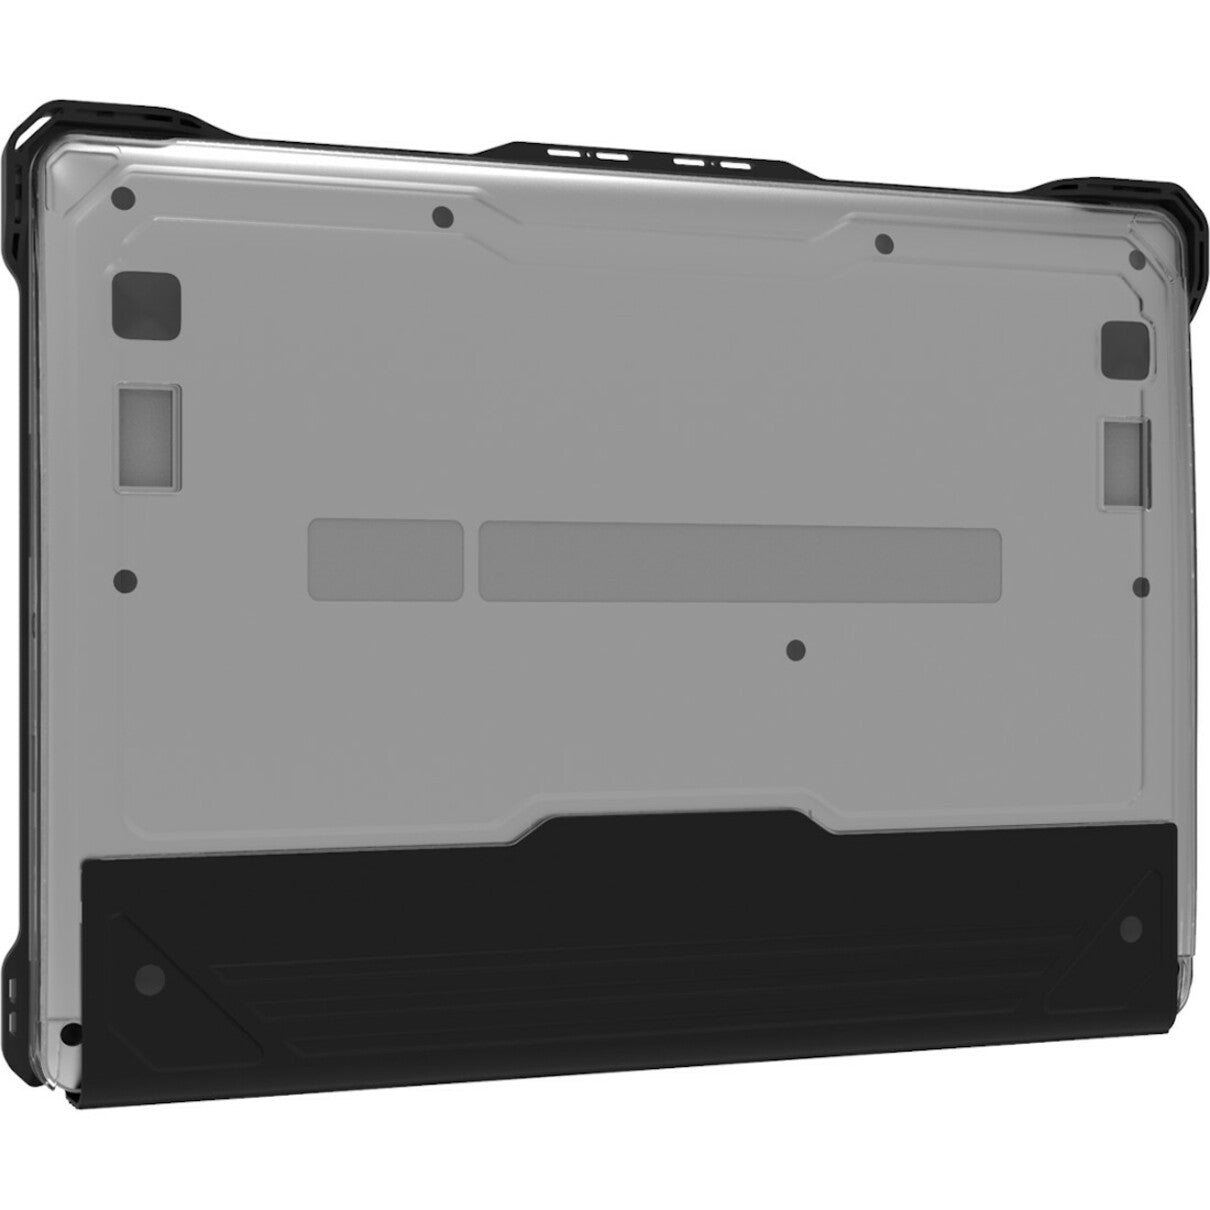 MAXCases Extreme Shell-L for Dell 3100 Chromebook Clamshell 11.6" (Black)